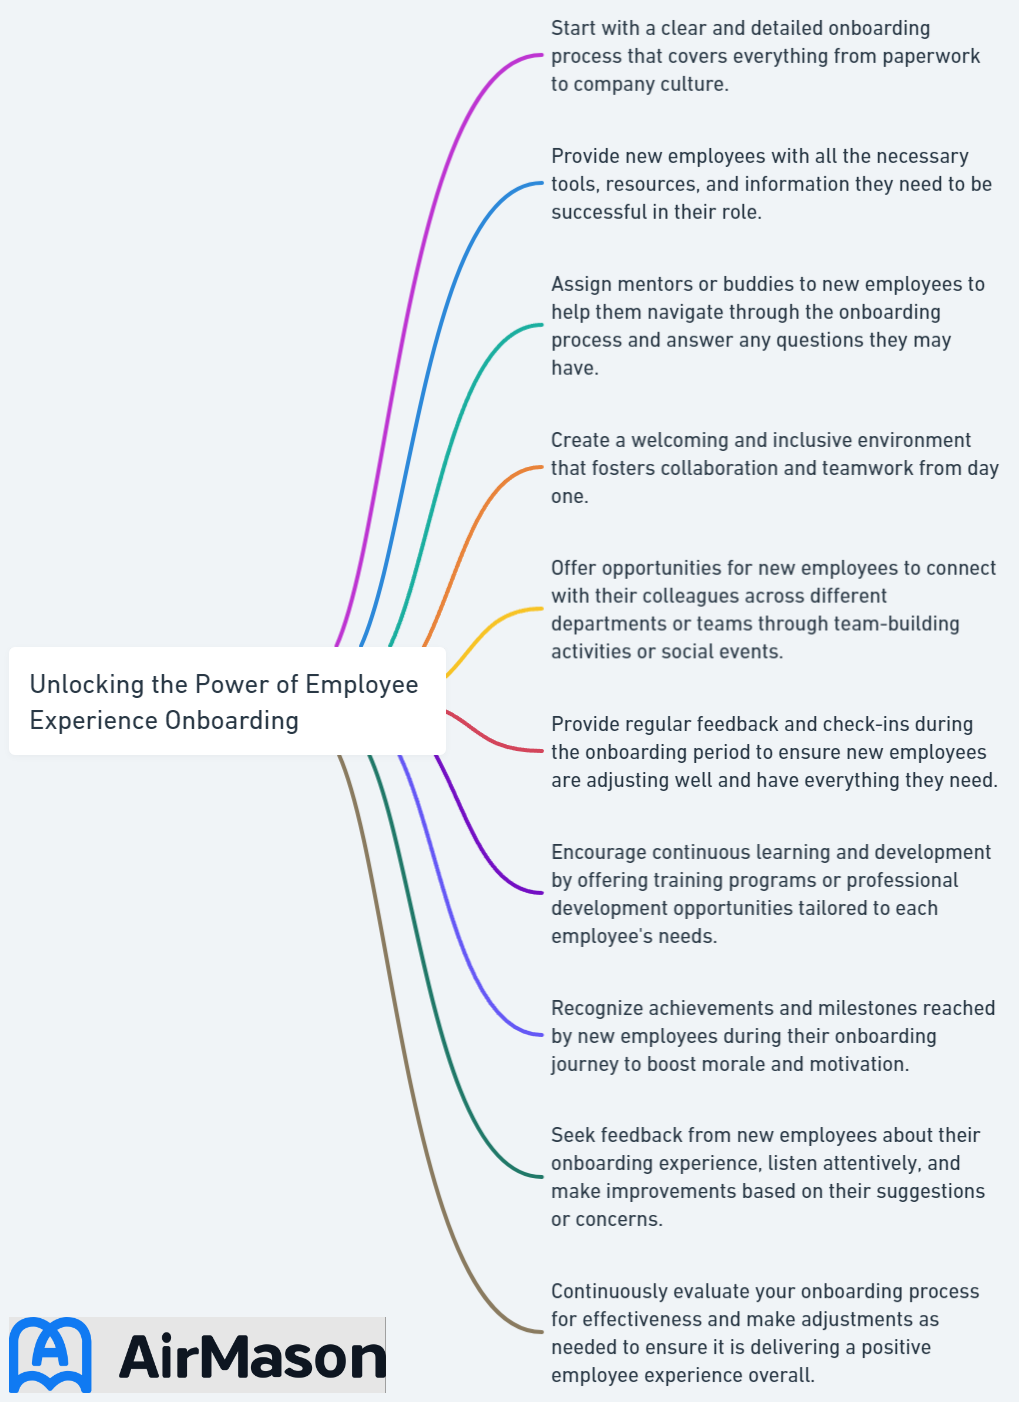 Unlocking the Power of Employee Experience Onboarding